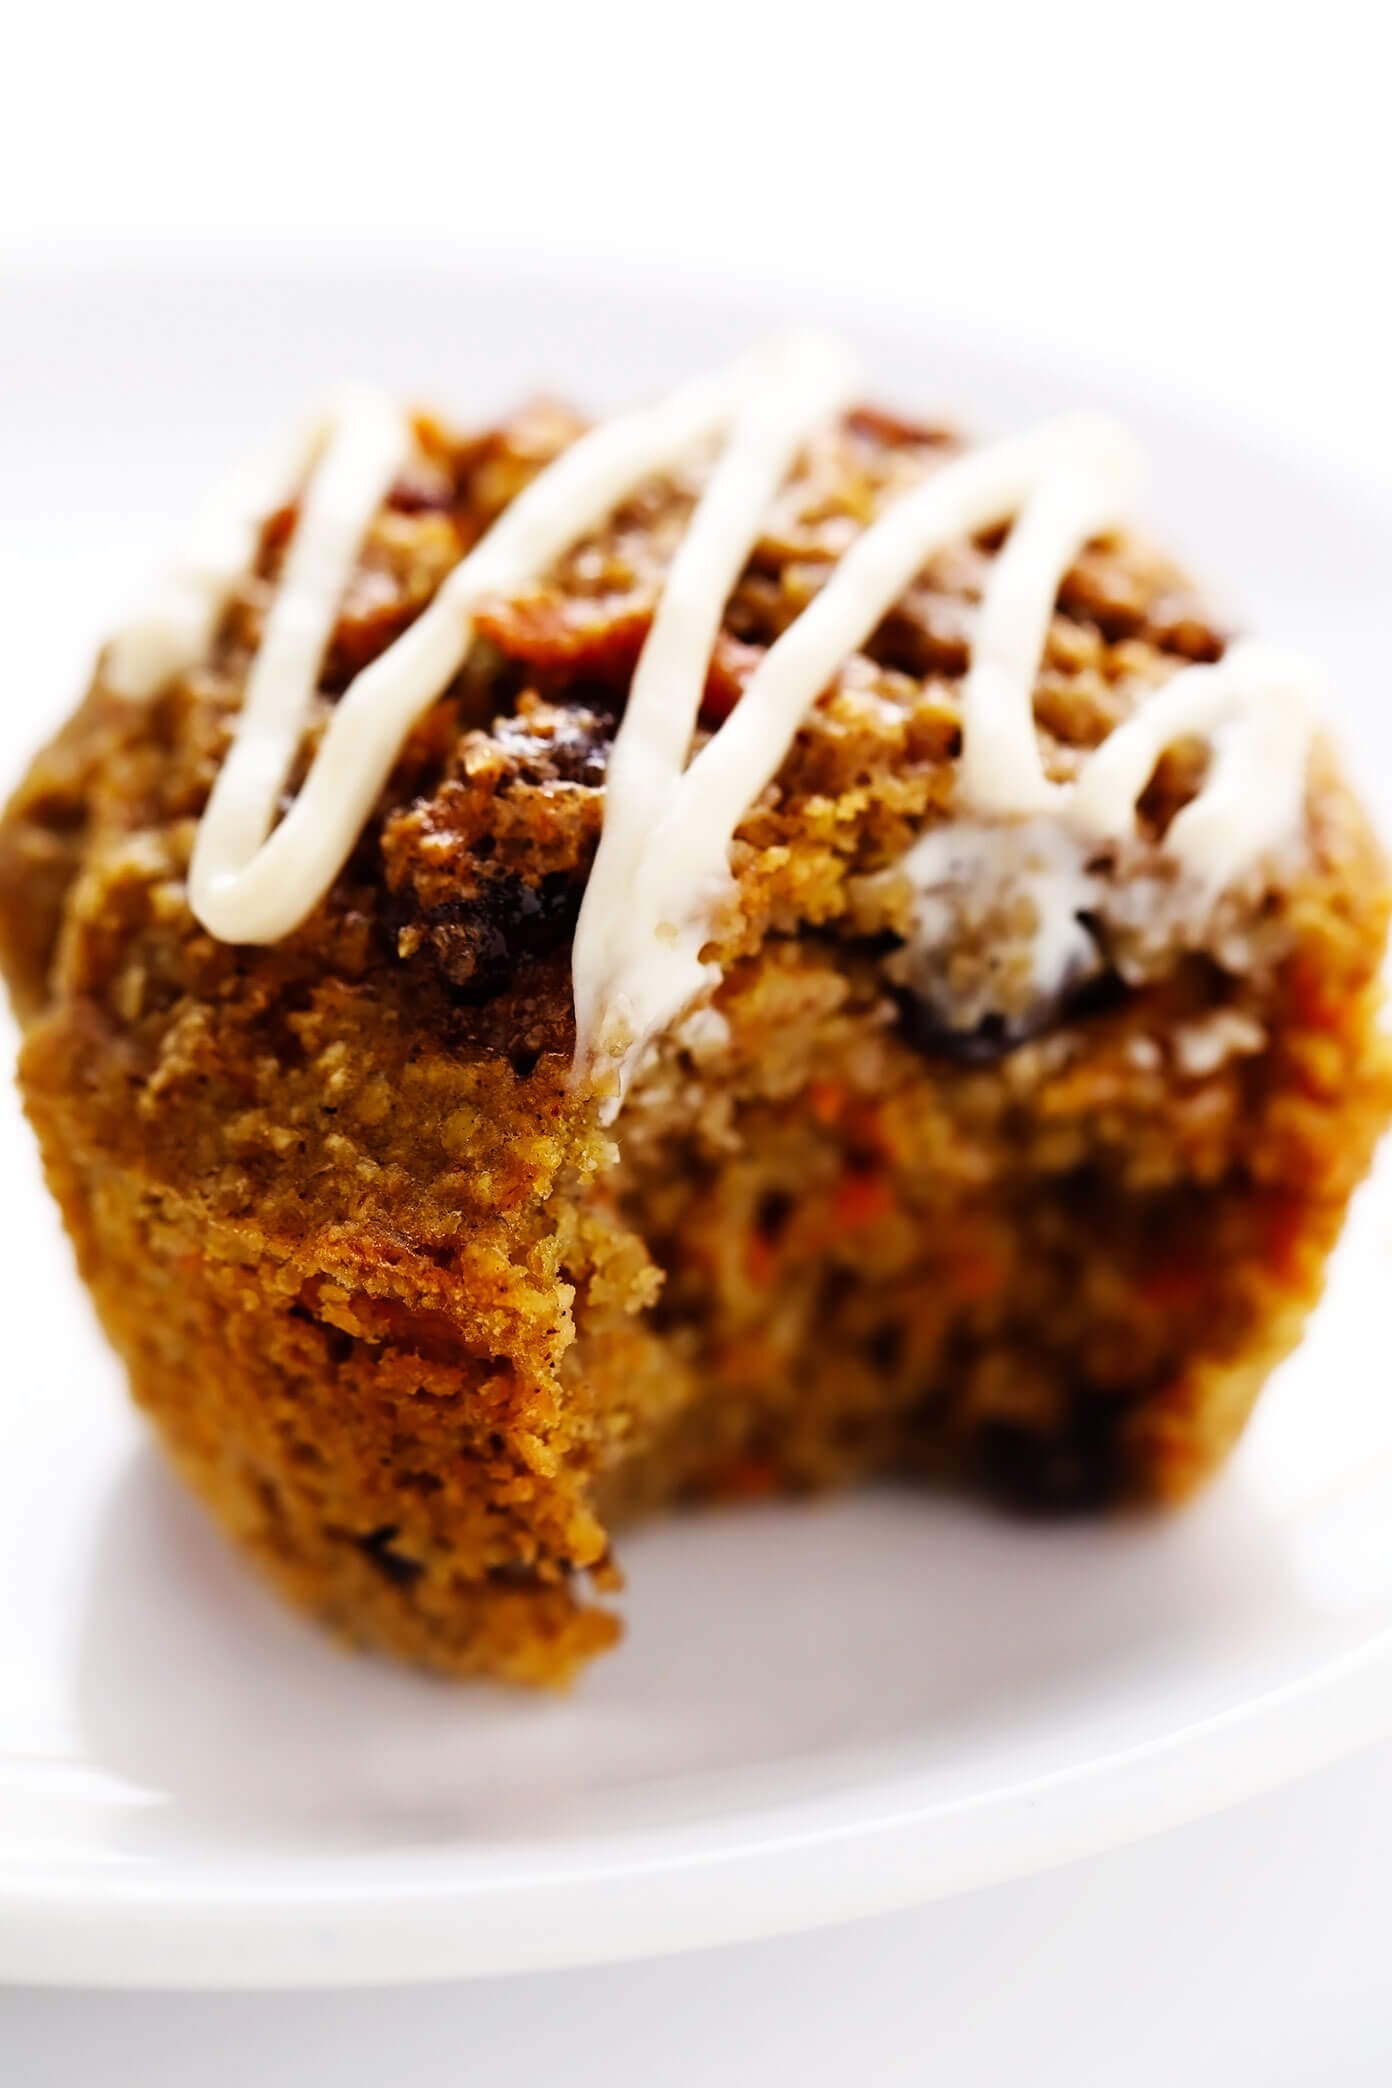 Healthy Carrot Cake Muffin with Bite Taken Out